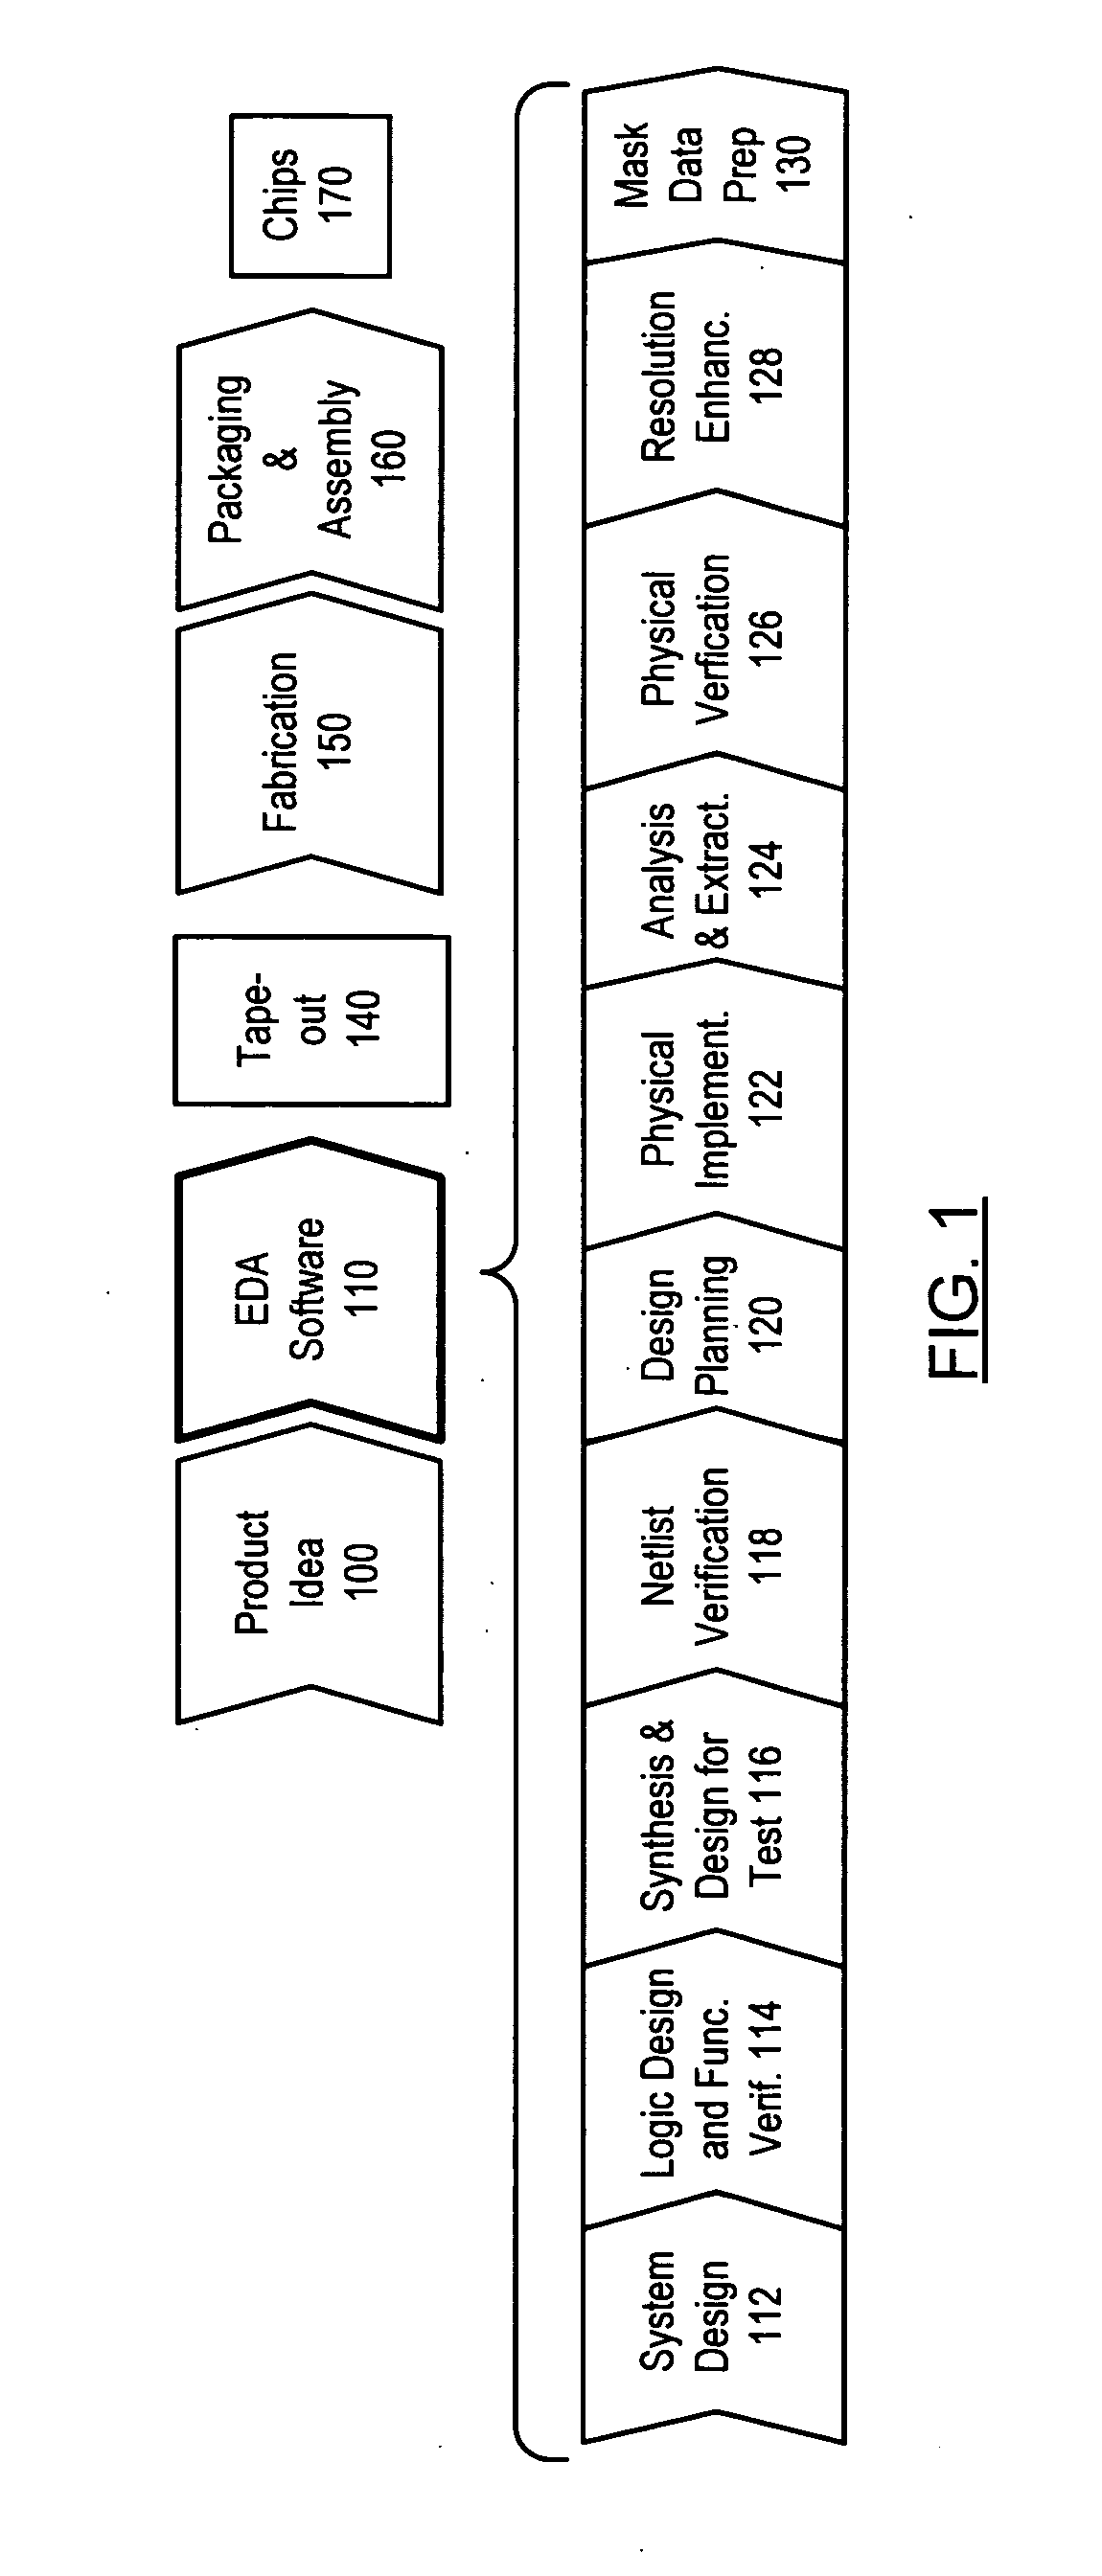 Managing integrated circuit stress using stress adjustment trenches